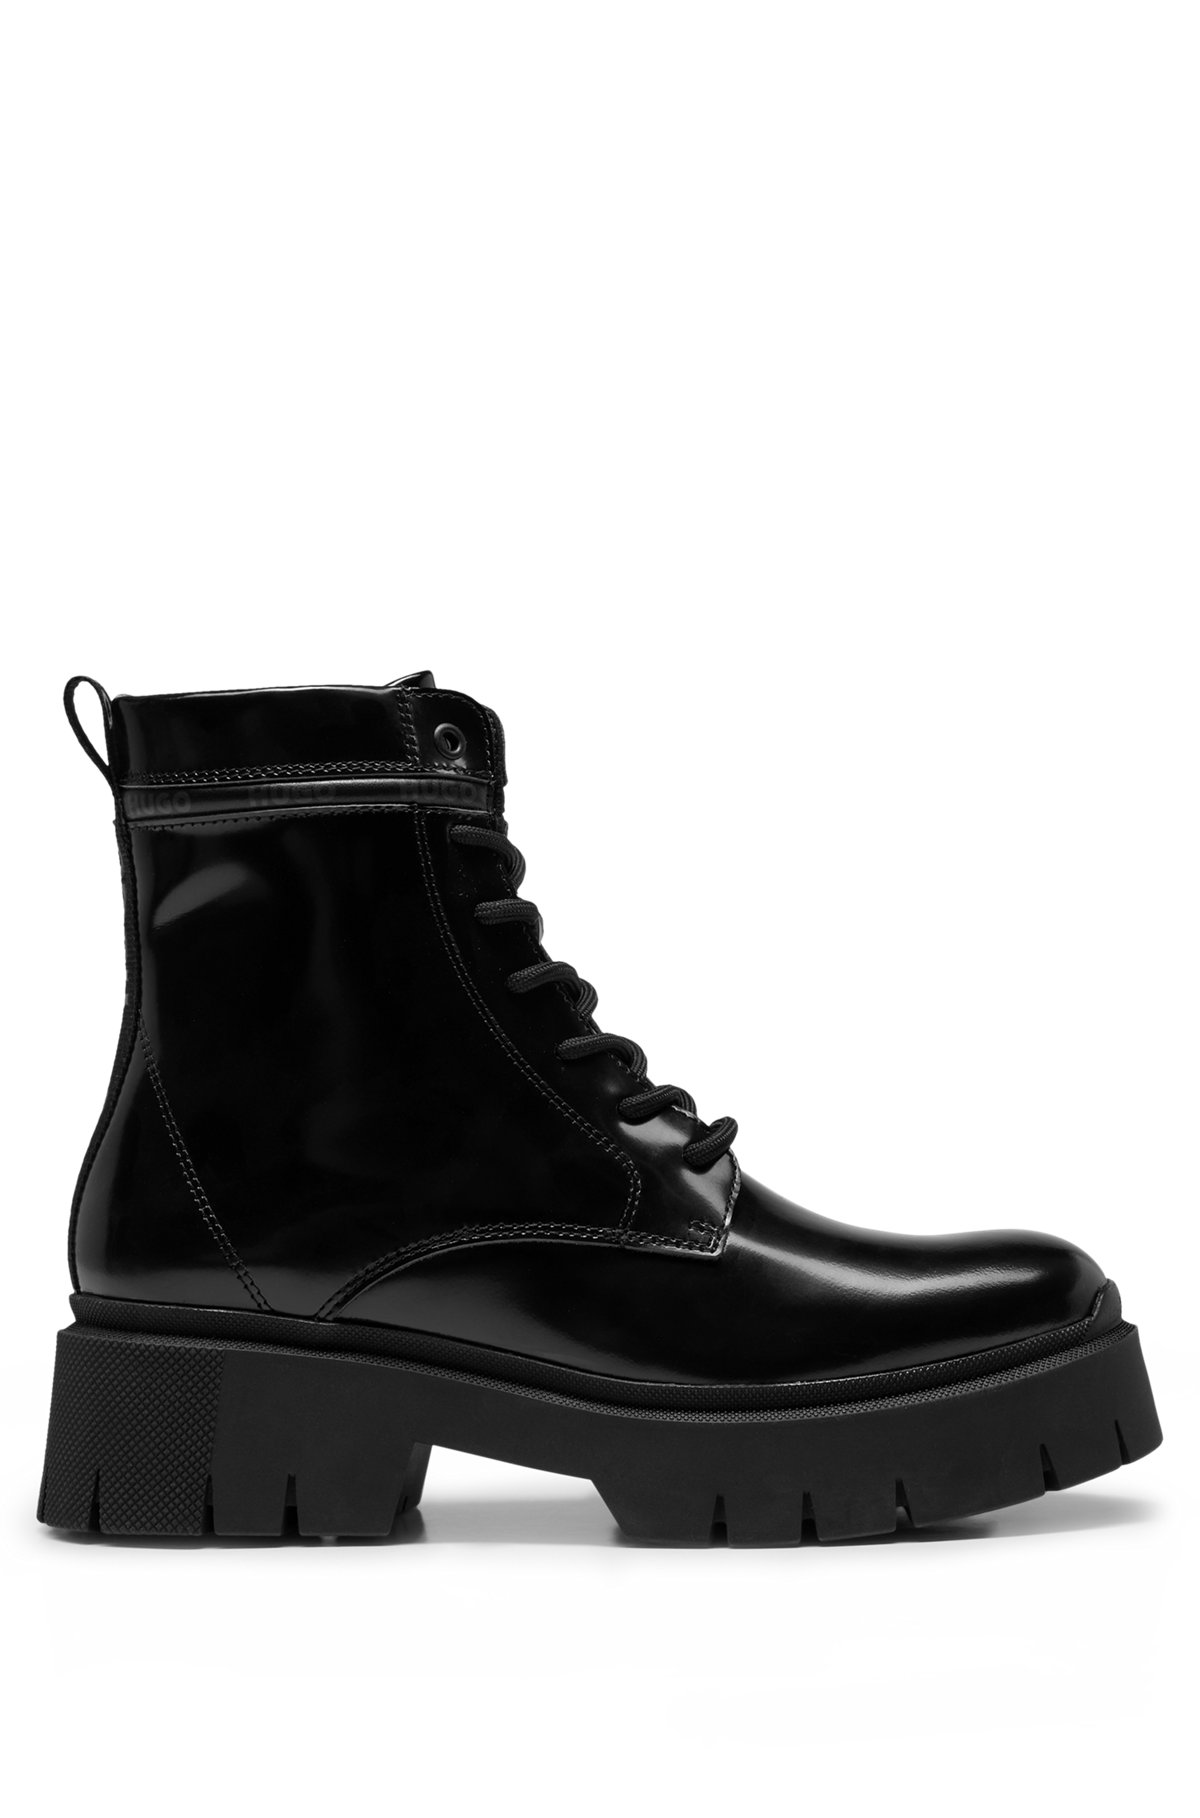 Lace-up leather boots with branded collar trim, Black